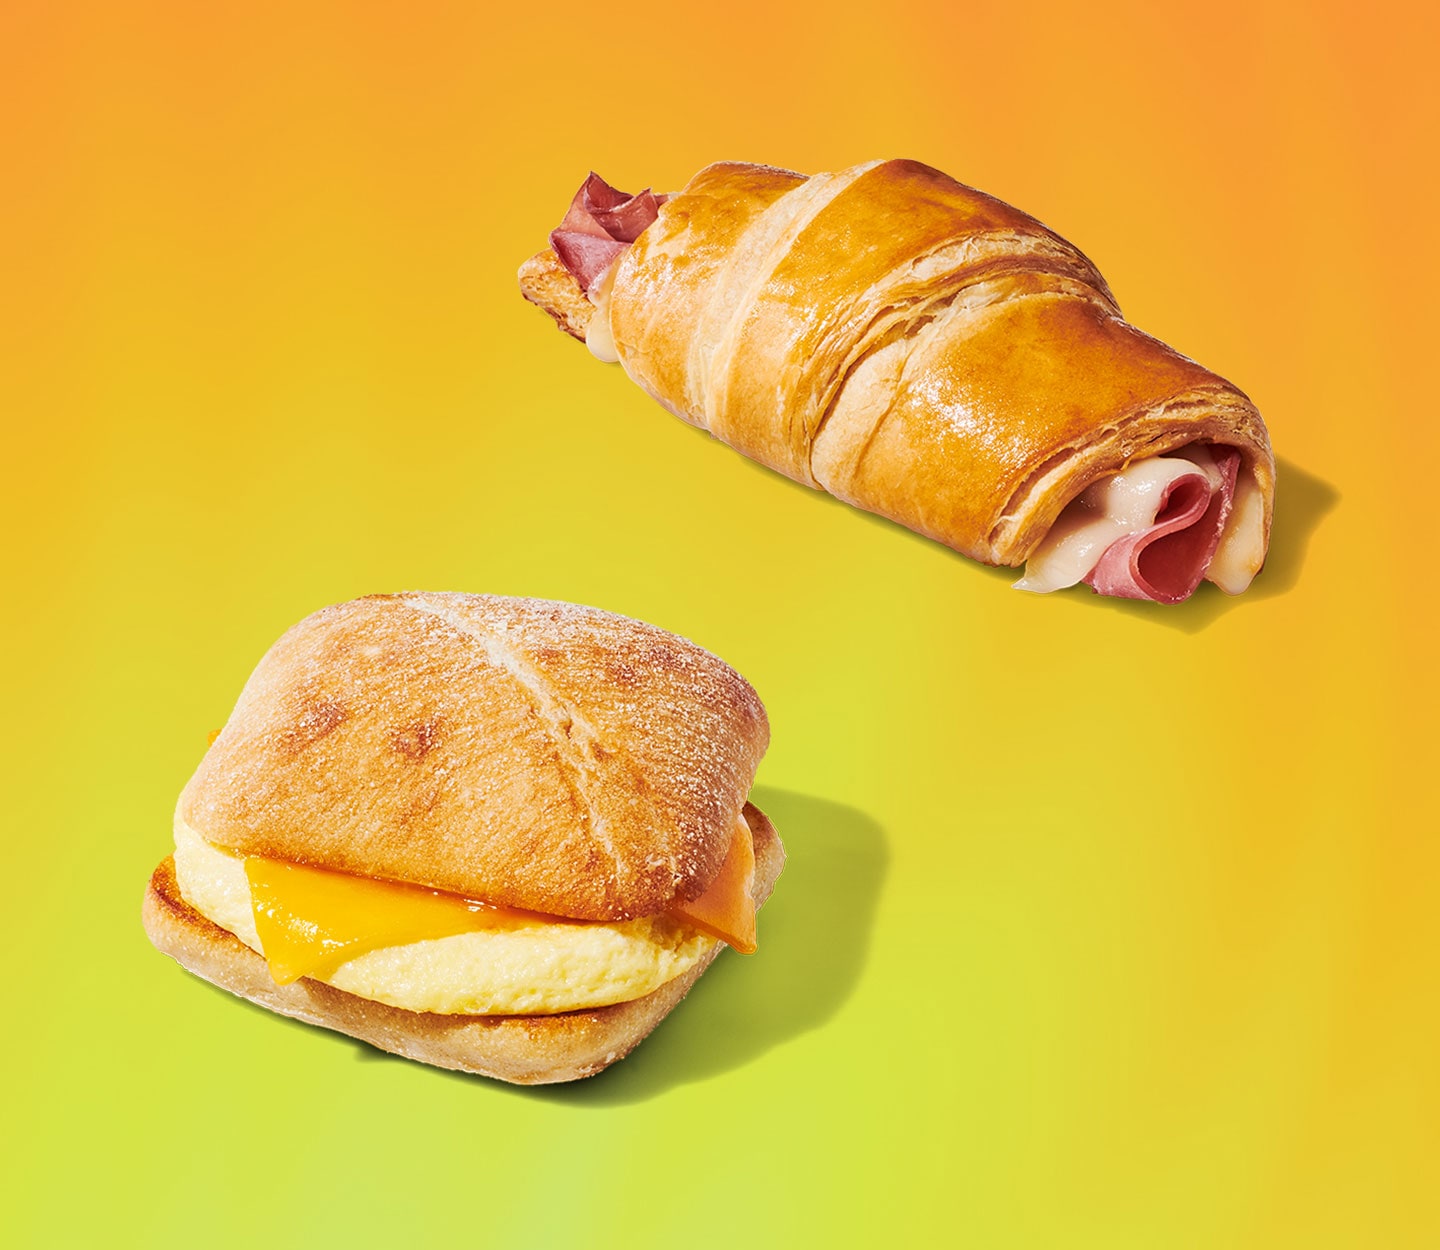 A hot breakfast sandwich and a croissant stuffed with ham and swiss cheese.